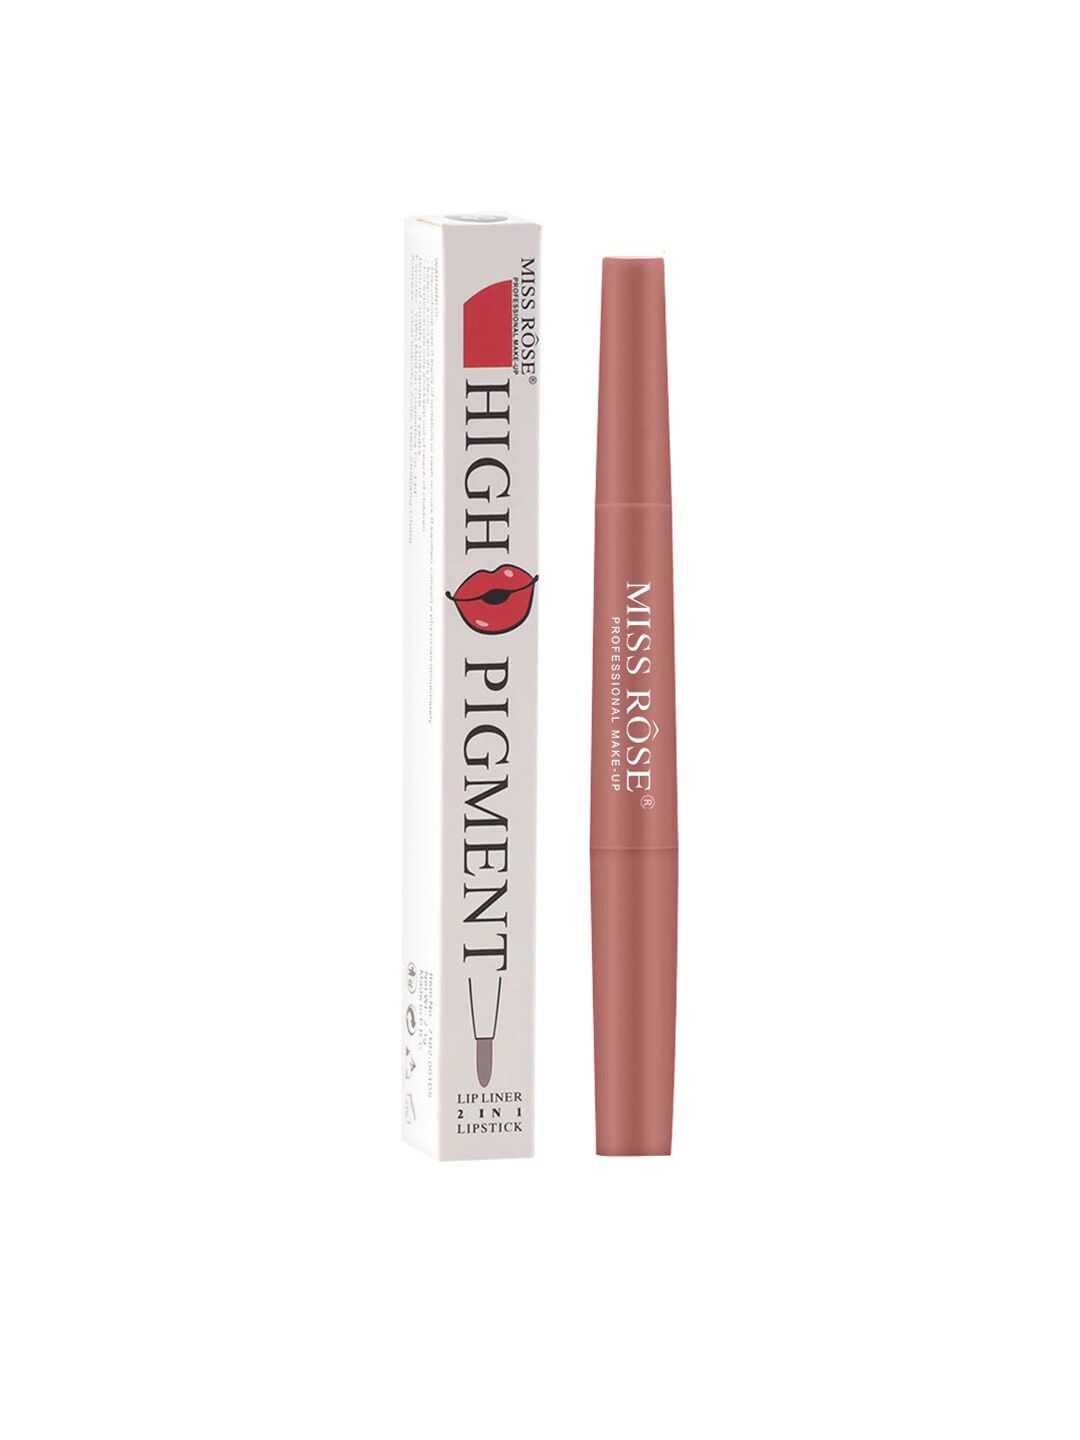 MISS ROSE 07 Nude-Coloured Creamy Matte Lipstick & Liner 20g Price in India